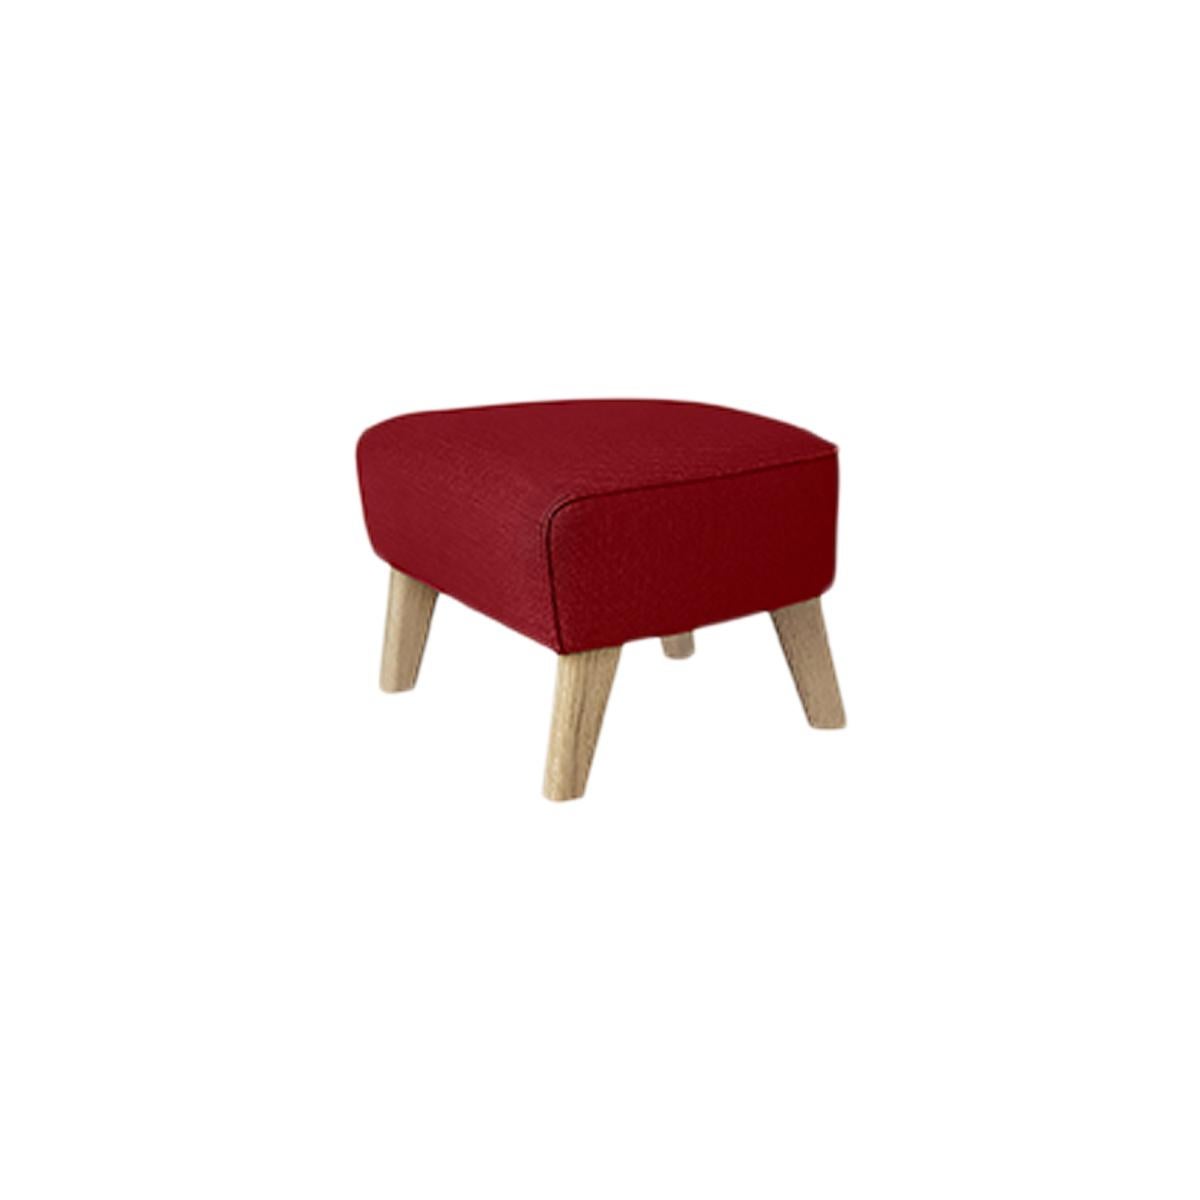 Red and natural Oak Raf Simons Vidar 3 My Own chair footstool by Lassen
Dimensions: w 56 x d 58 x h 40 cm 
Materials: Textile
Also Available: Other colors available.

The My Own chair footstool has been designed in the same spirit as Flemming